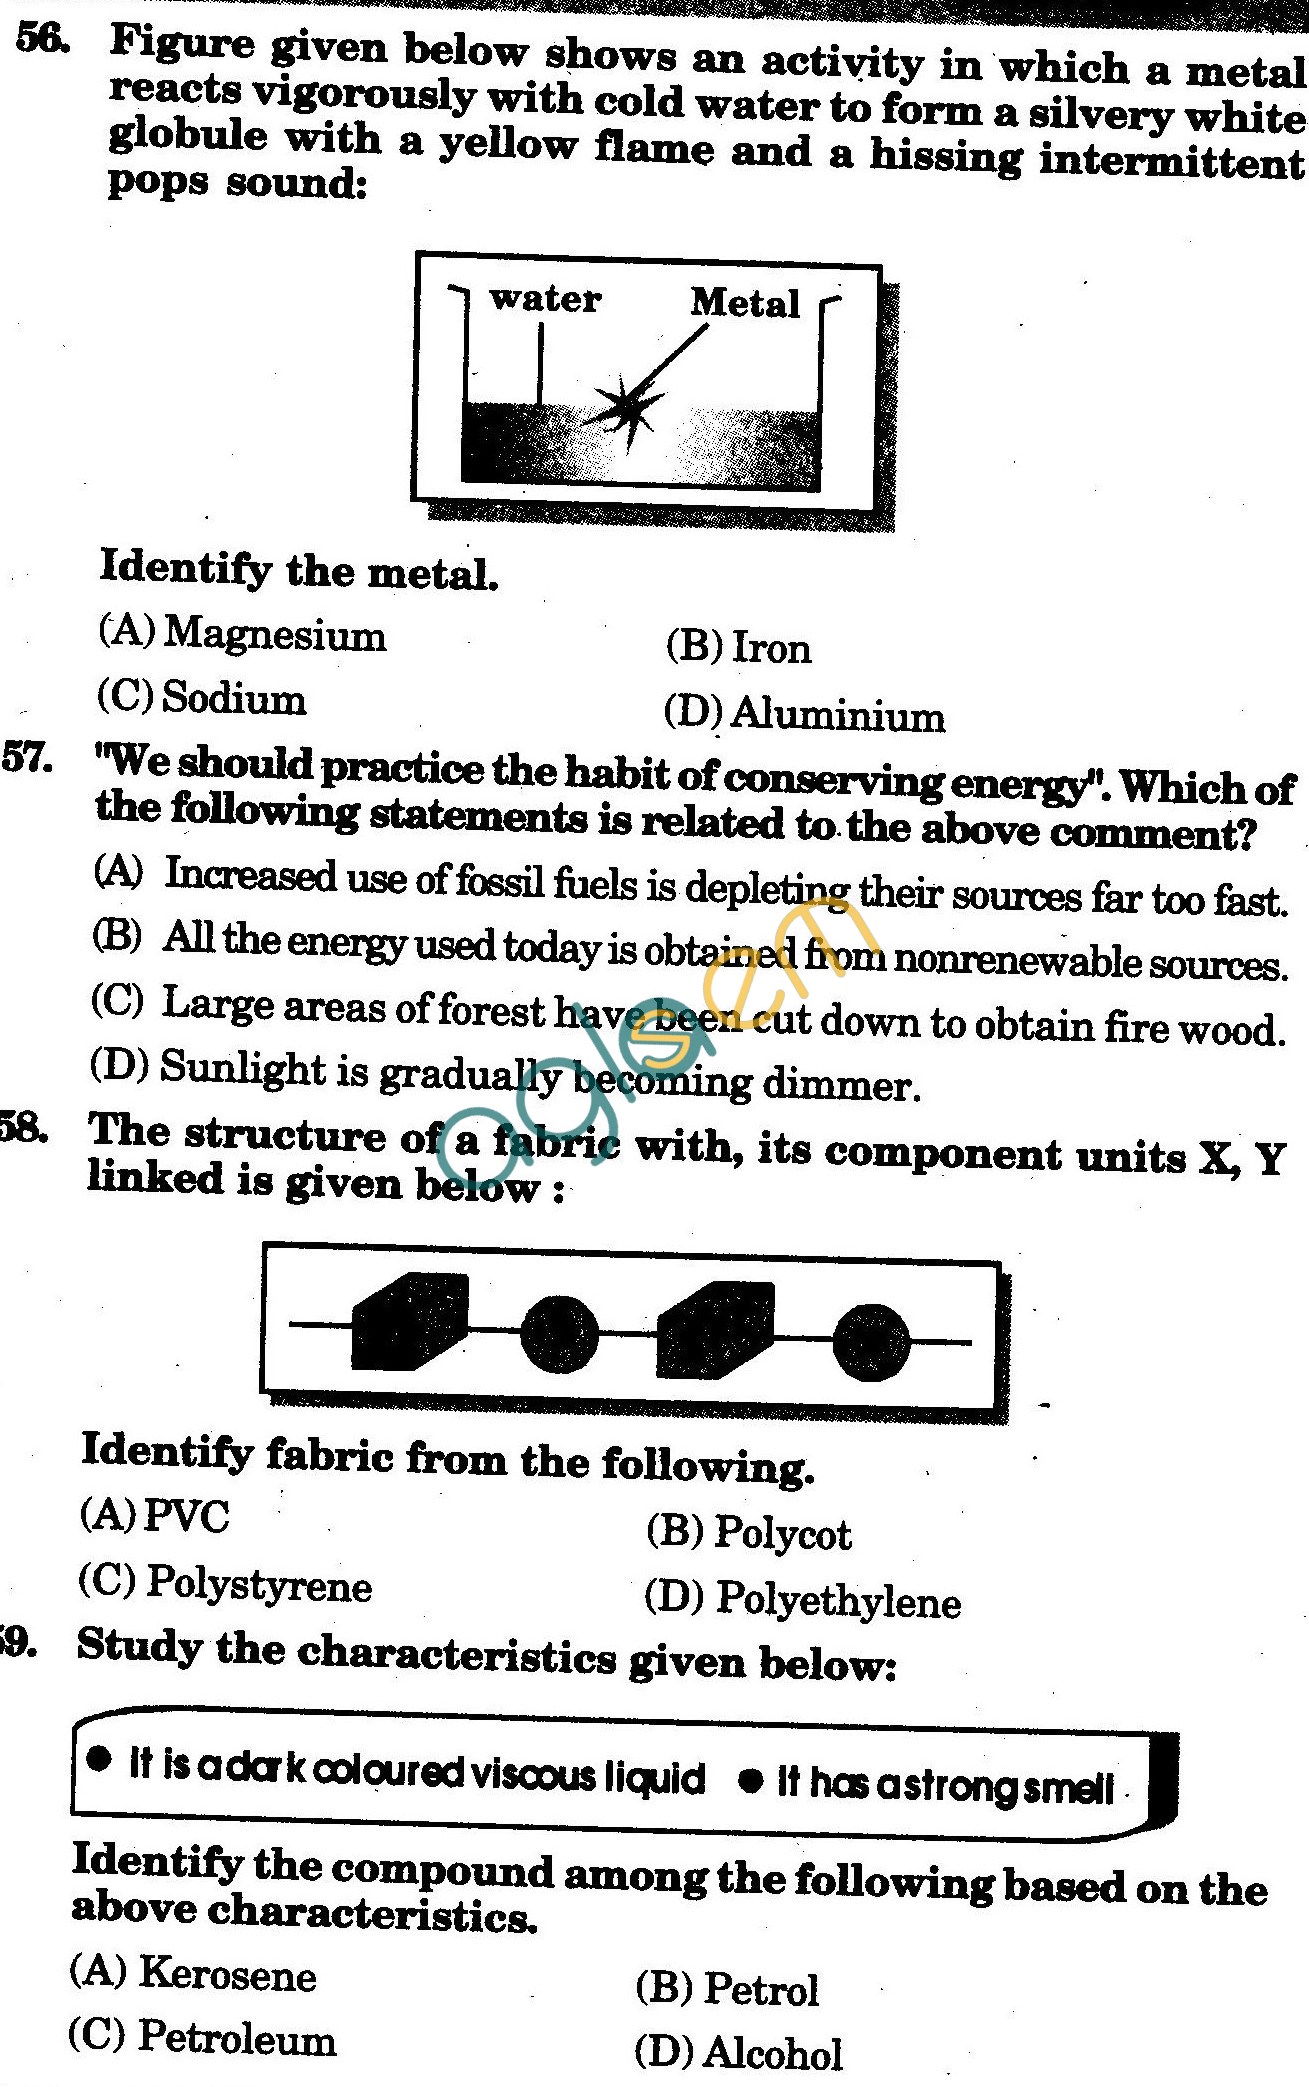 NSTSE 2010: Class VIII Question Paper with Answers - Chemistry